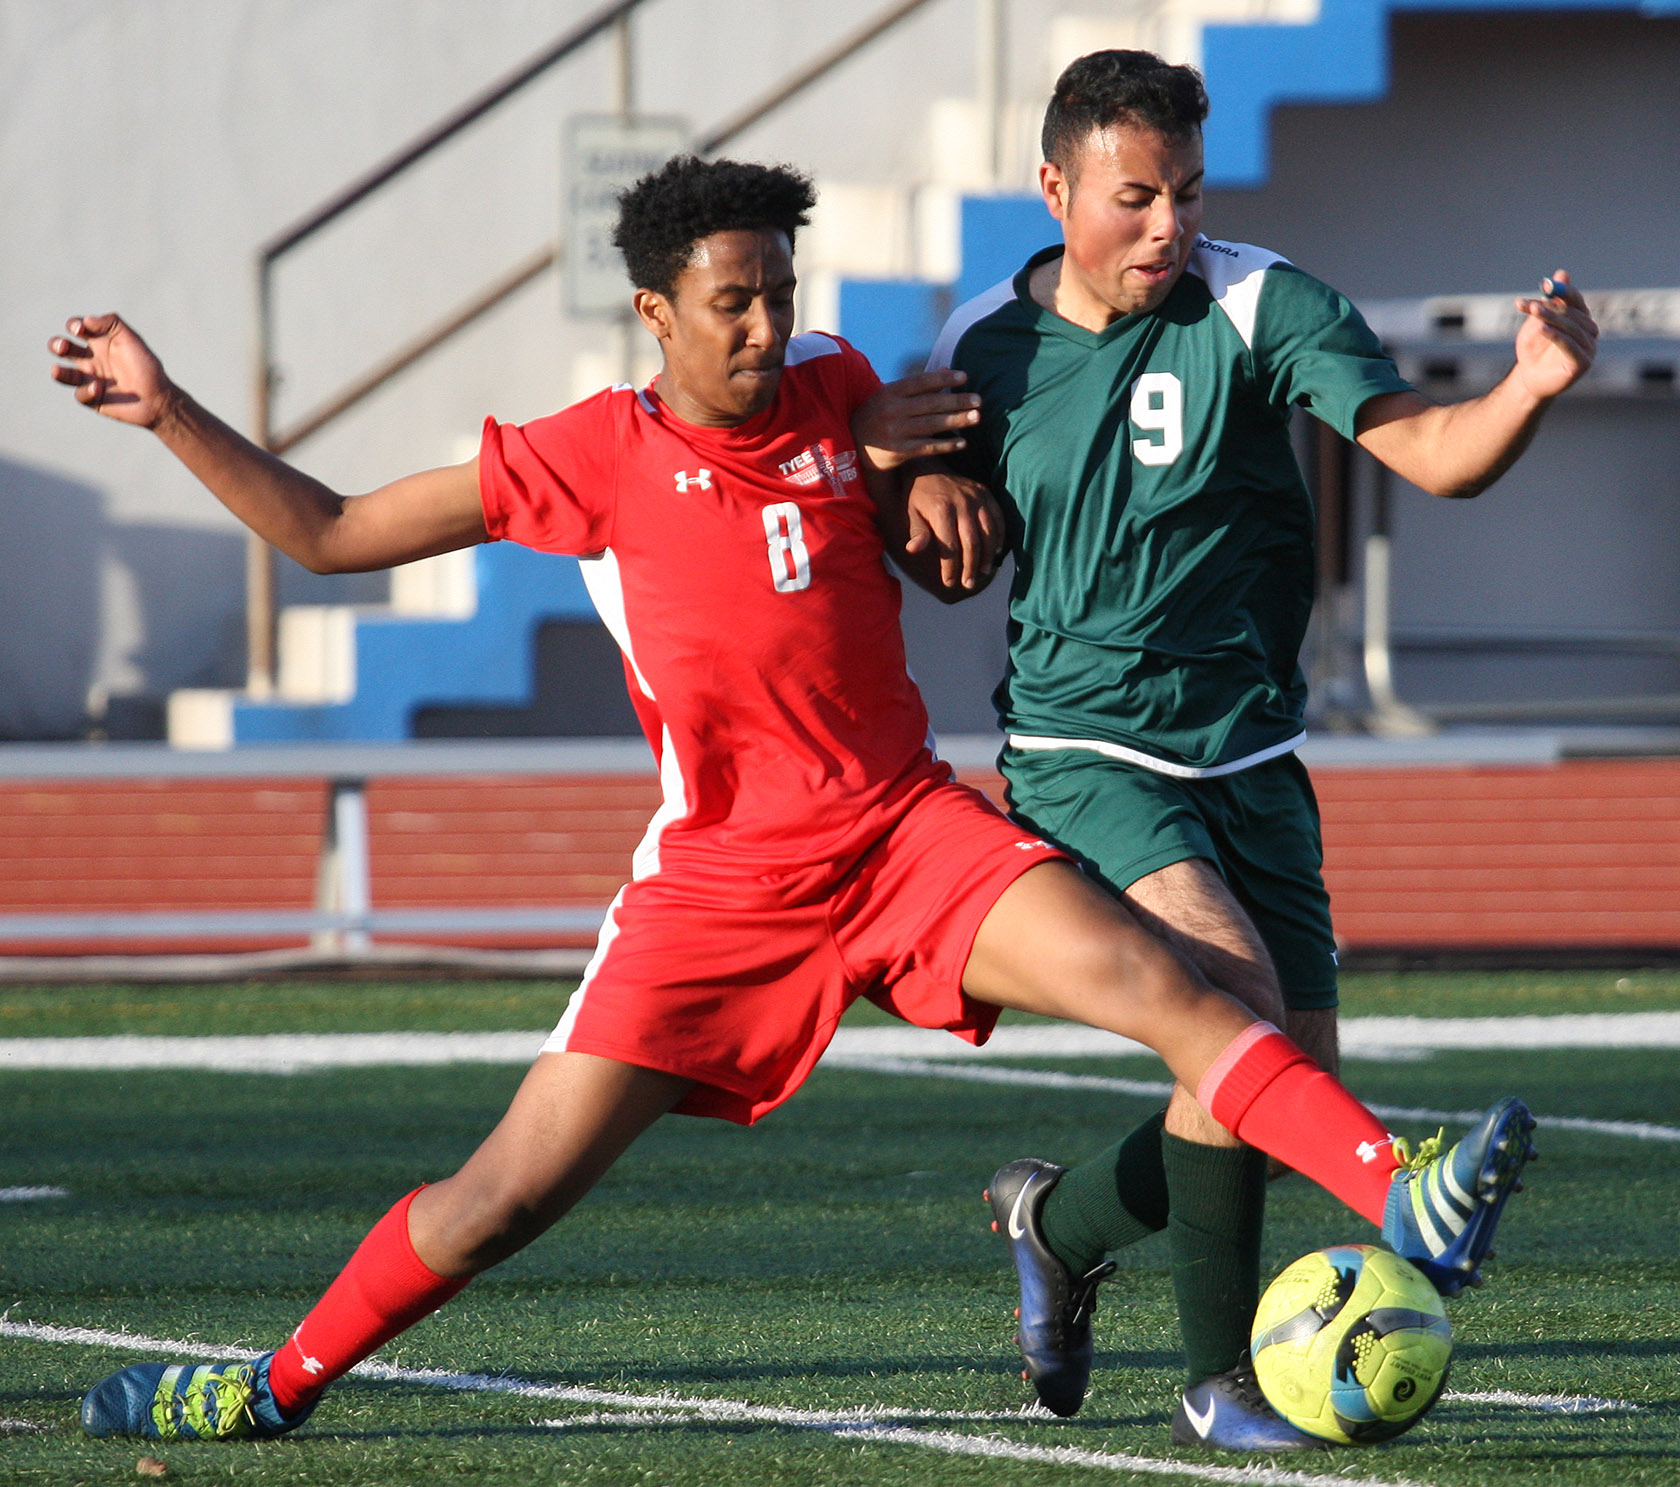 Ali Yusuf of Tyee and Evergreen's Adair Ramirez of Evergreen try to gain control of the ball.